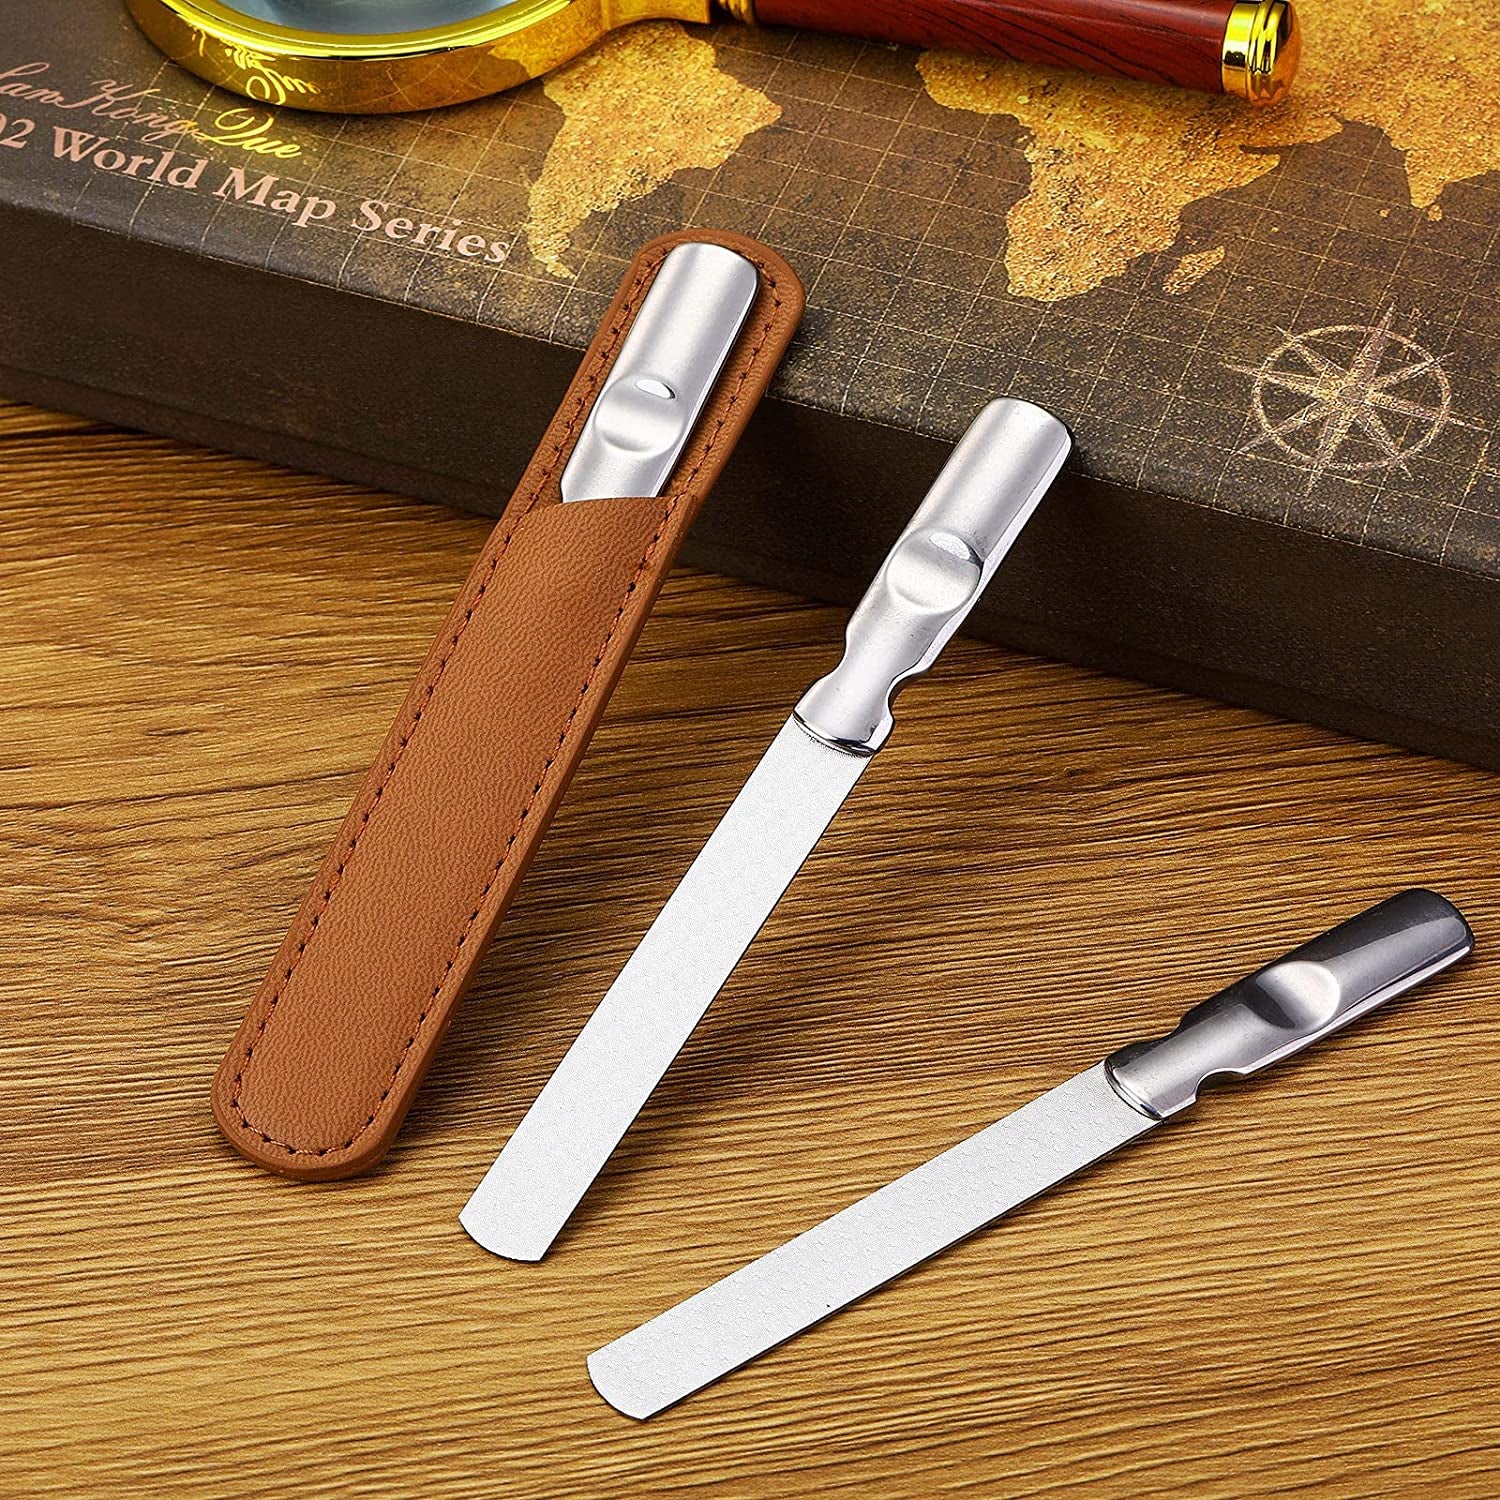 3 Pieces Stainless Steel Metal Nail File with Leather Case Heavy Duty Double Sided Nail Files Manicure Set with Leather Sheath (Brown)